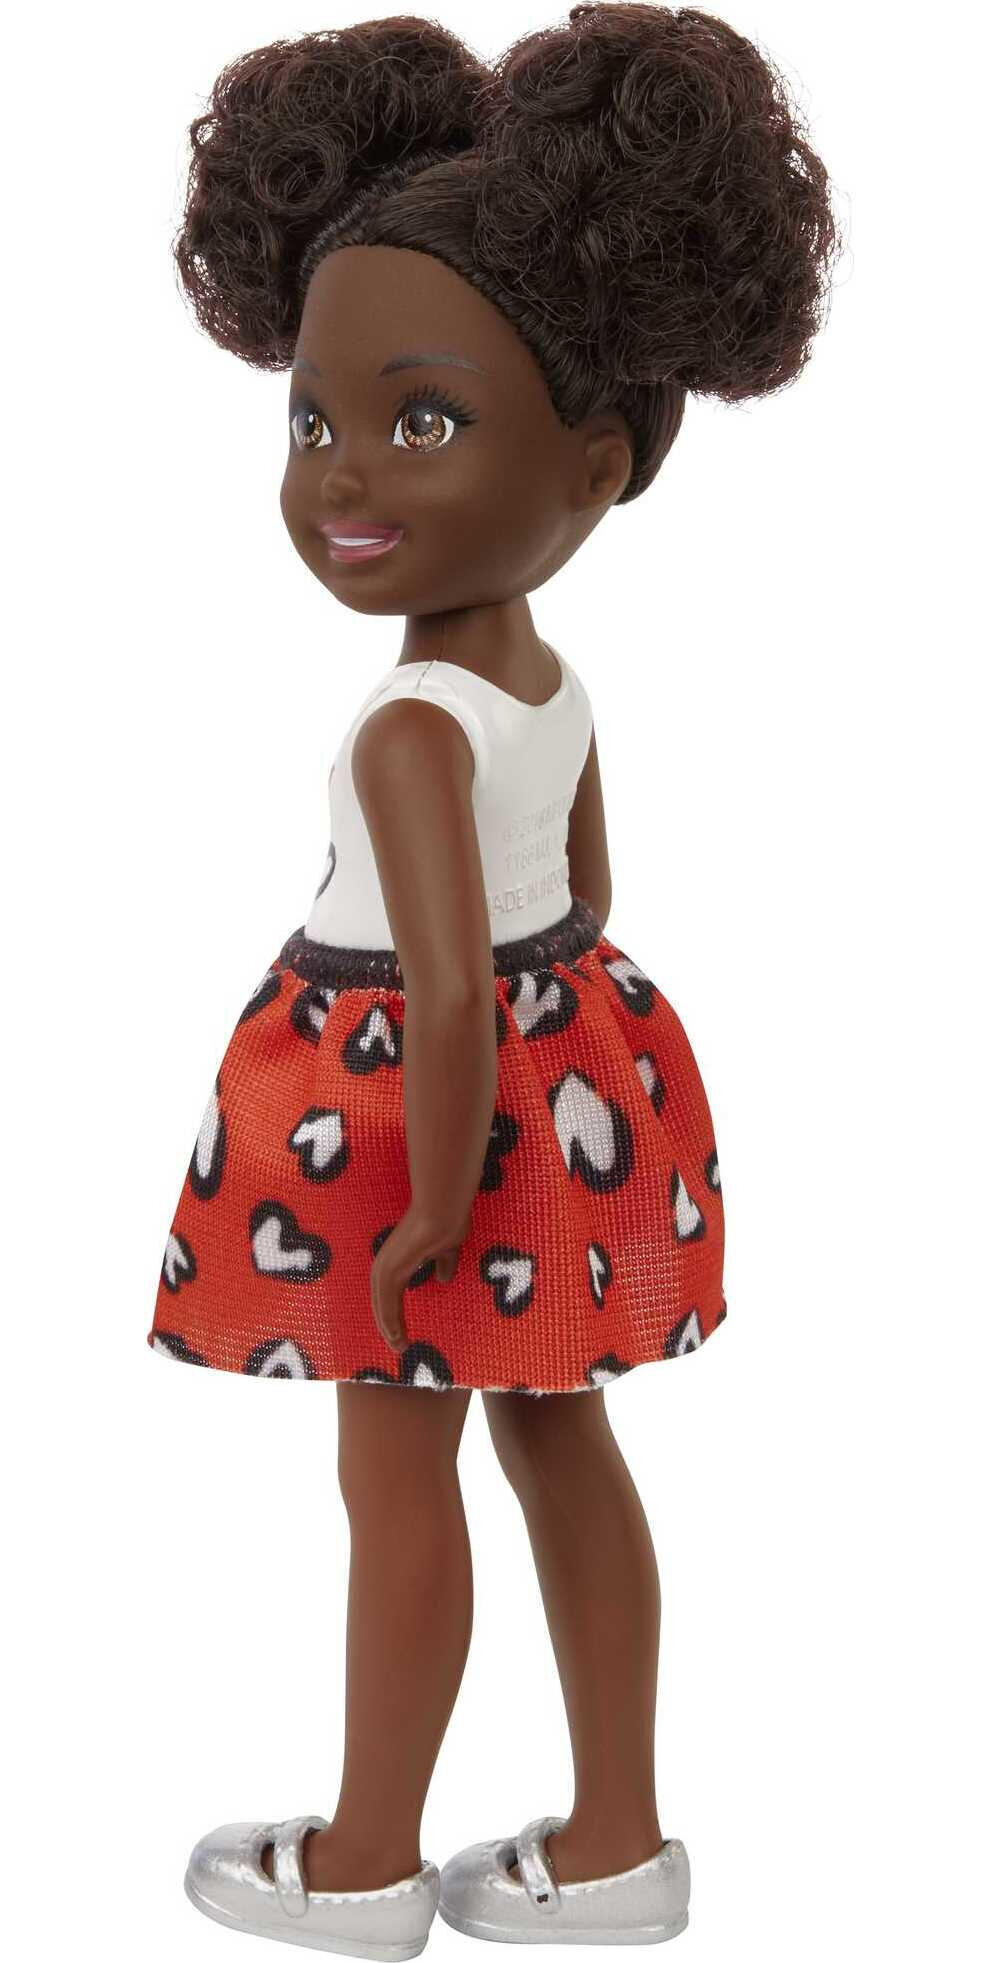 Barbie Chelsea Small Doll with Black Hair in Afro Puffs Wearing Removable Skirt & Silvery Shoes - image 4 of 6